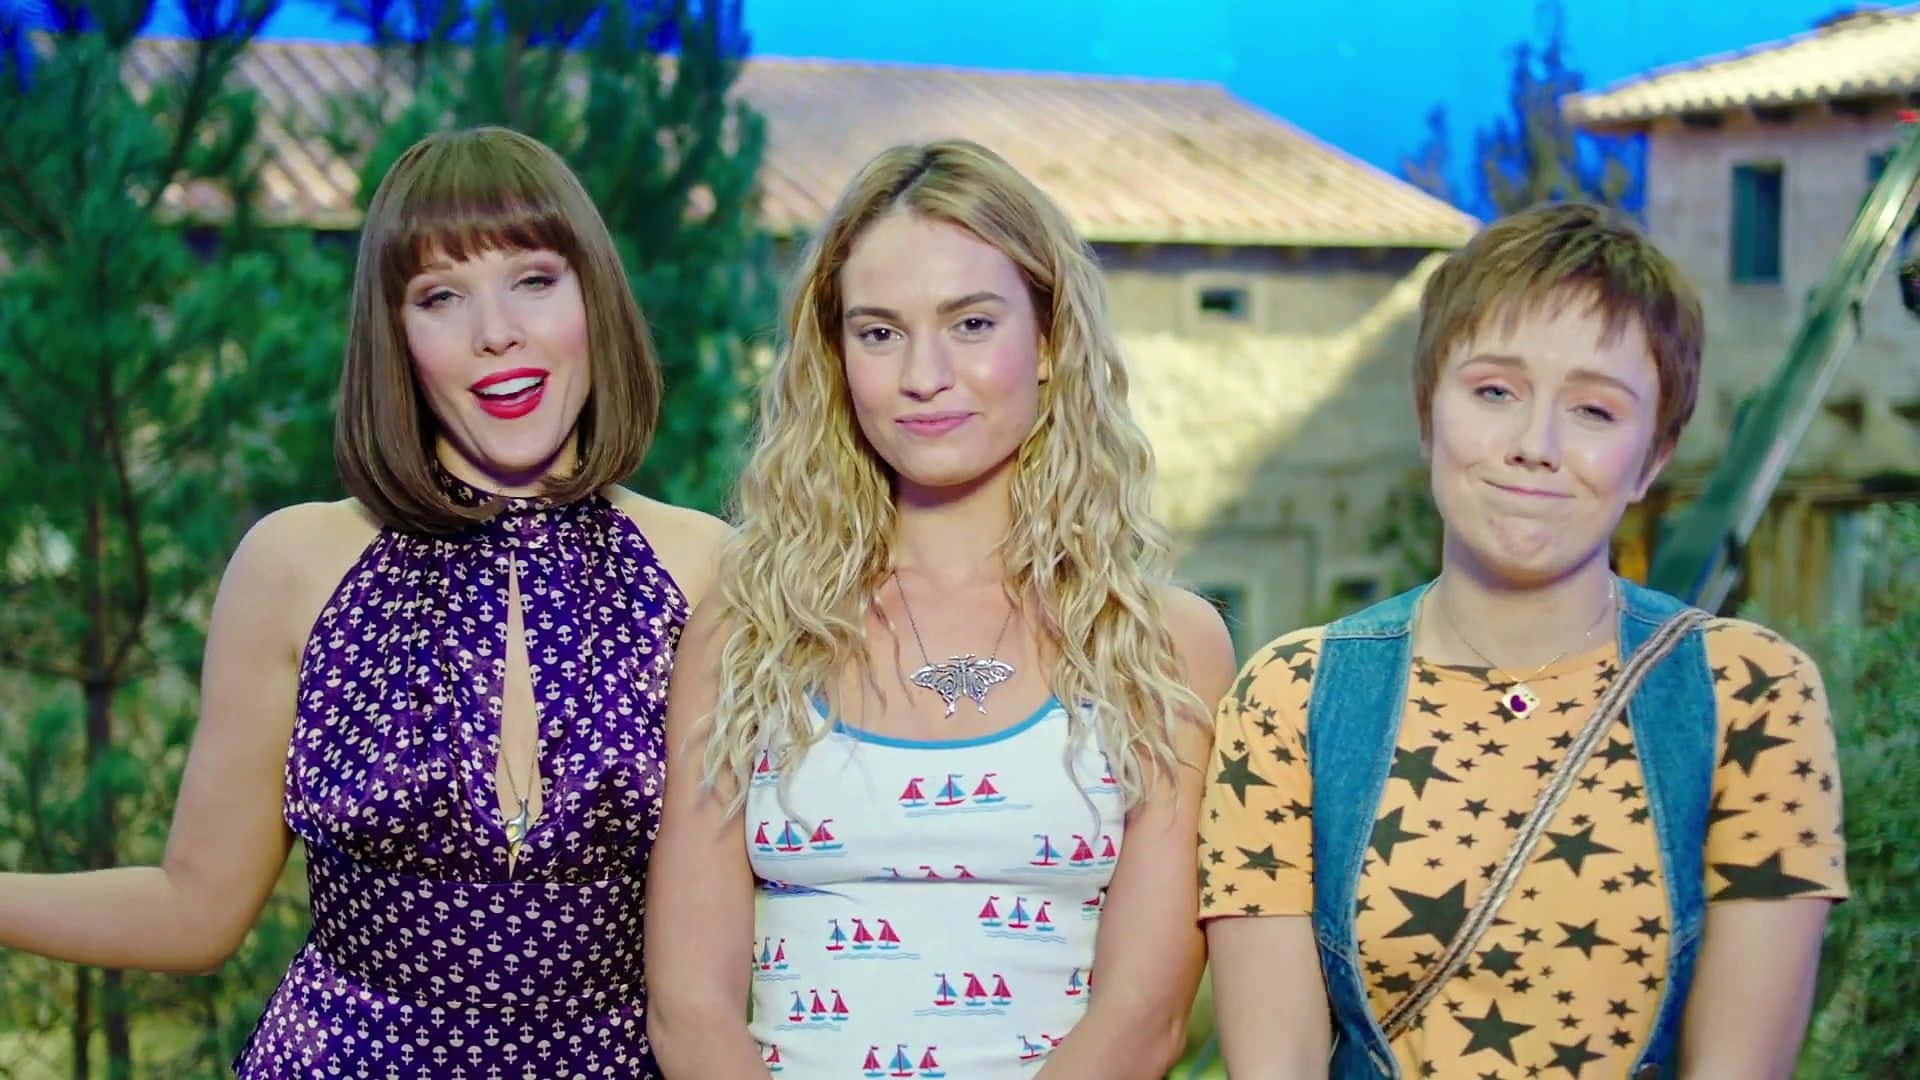 Three Girls Are Standing Next To Each Other On A Television Show